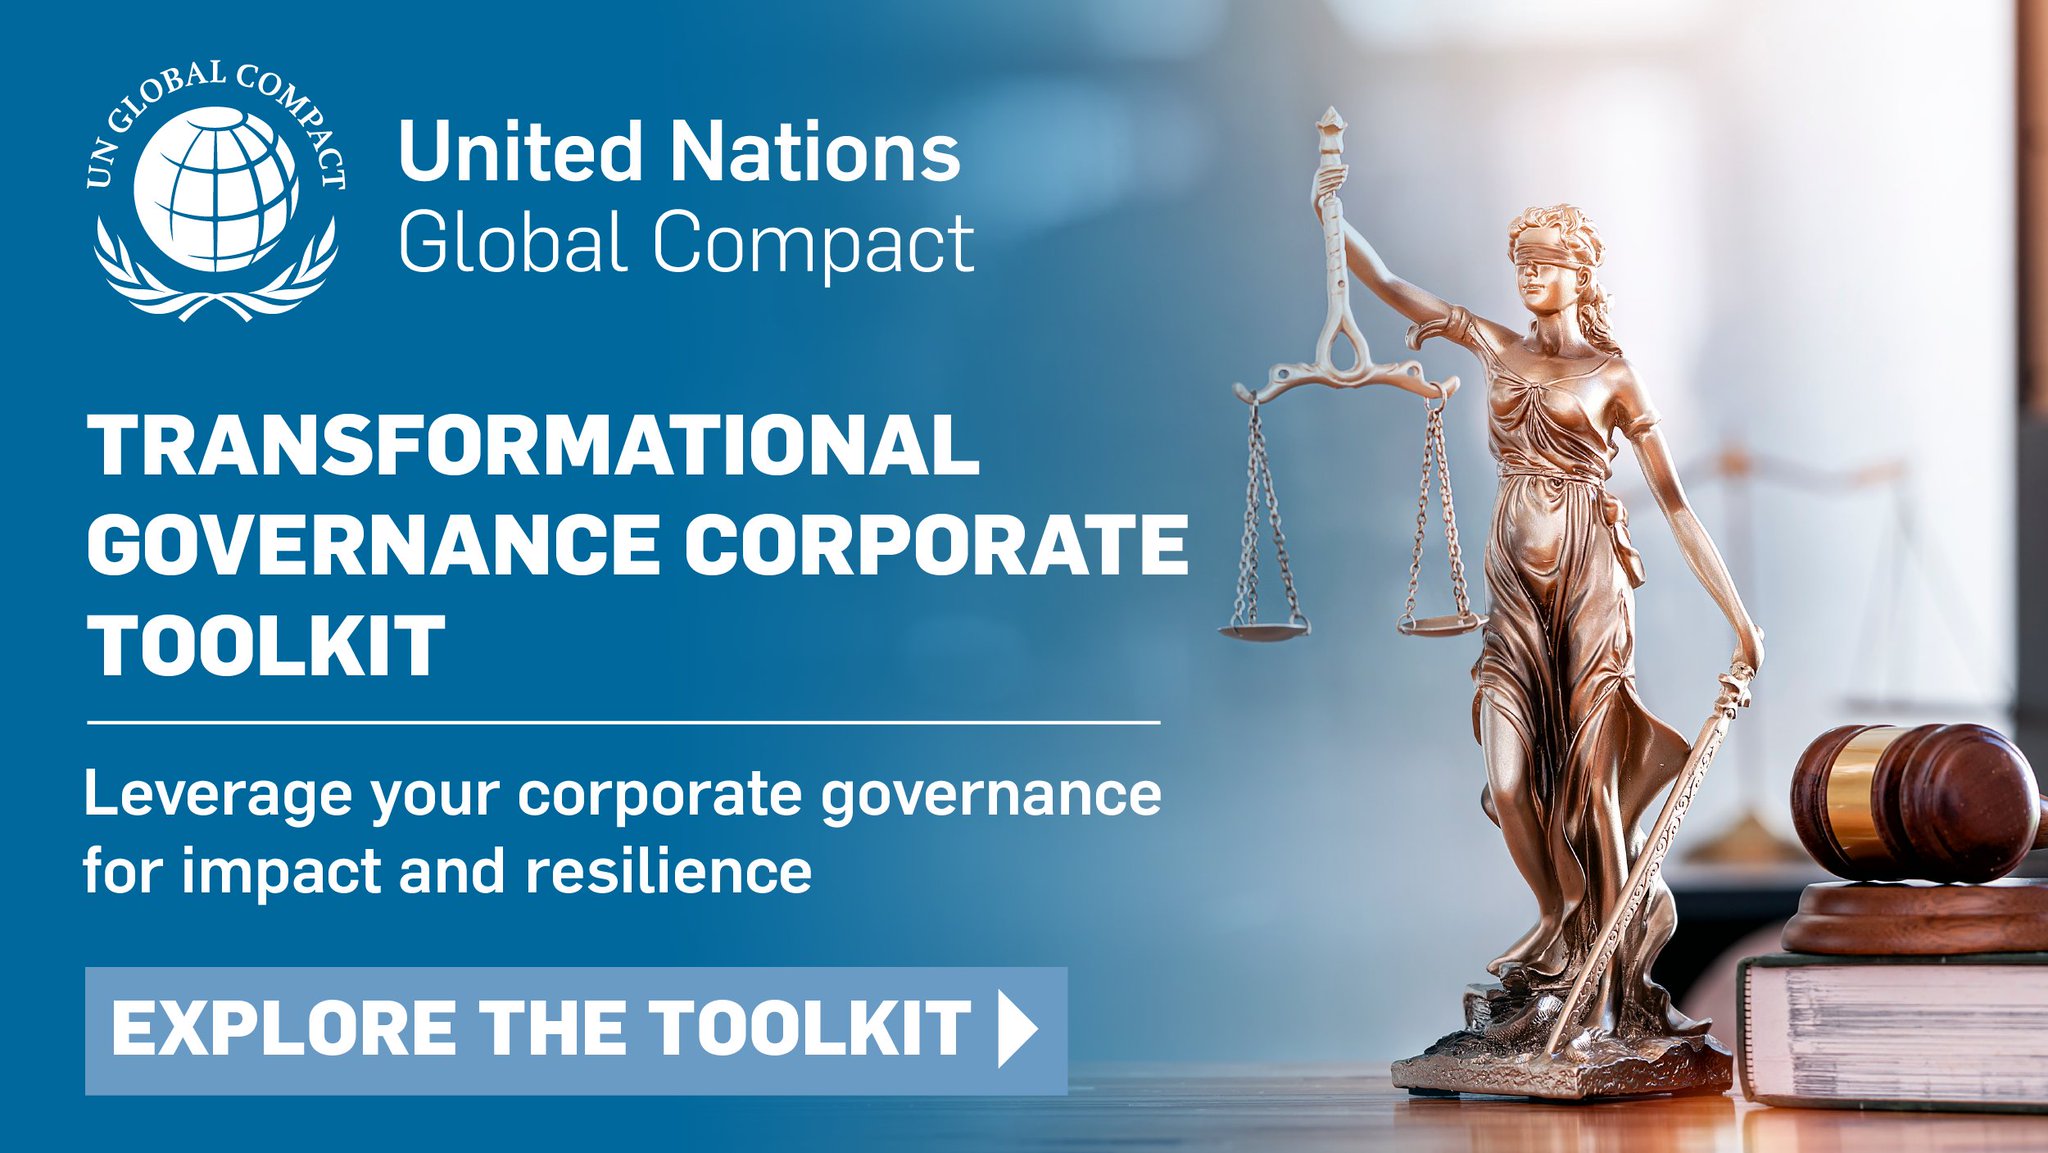 UN Global Compact Introduces Toolkit to Drive Transformational Corporate Governance - ESG News